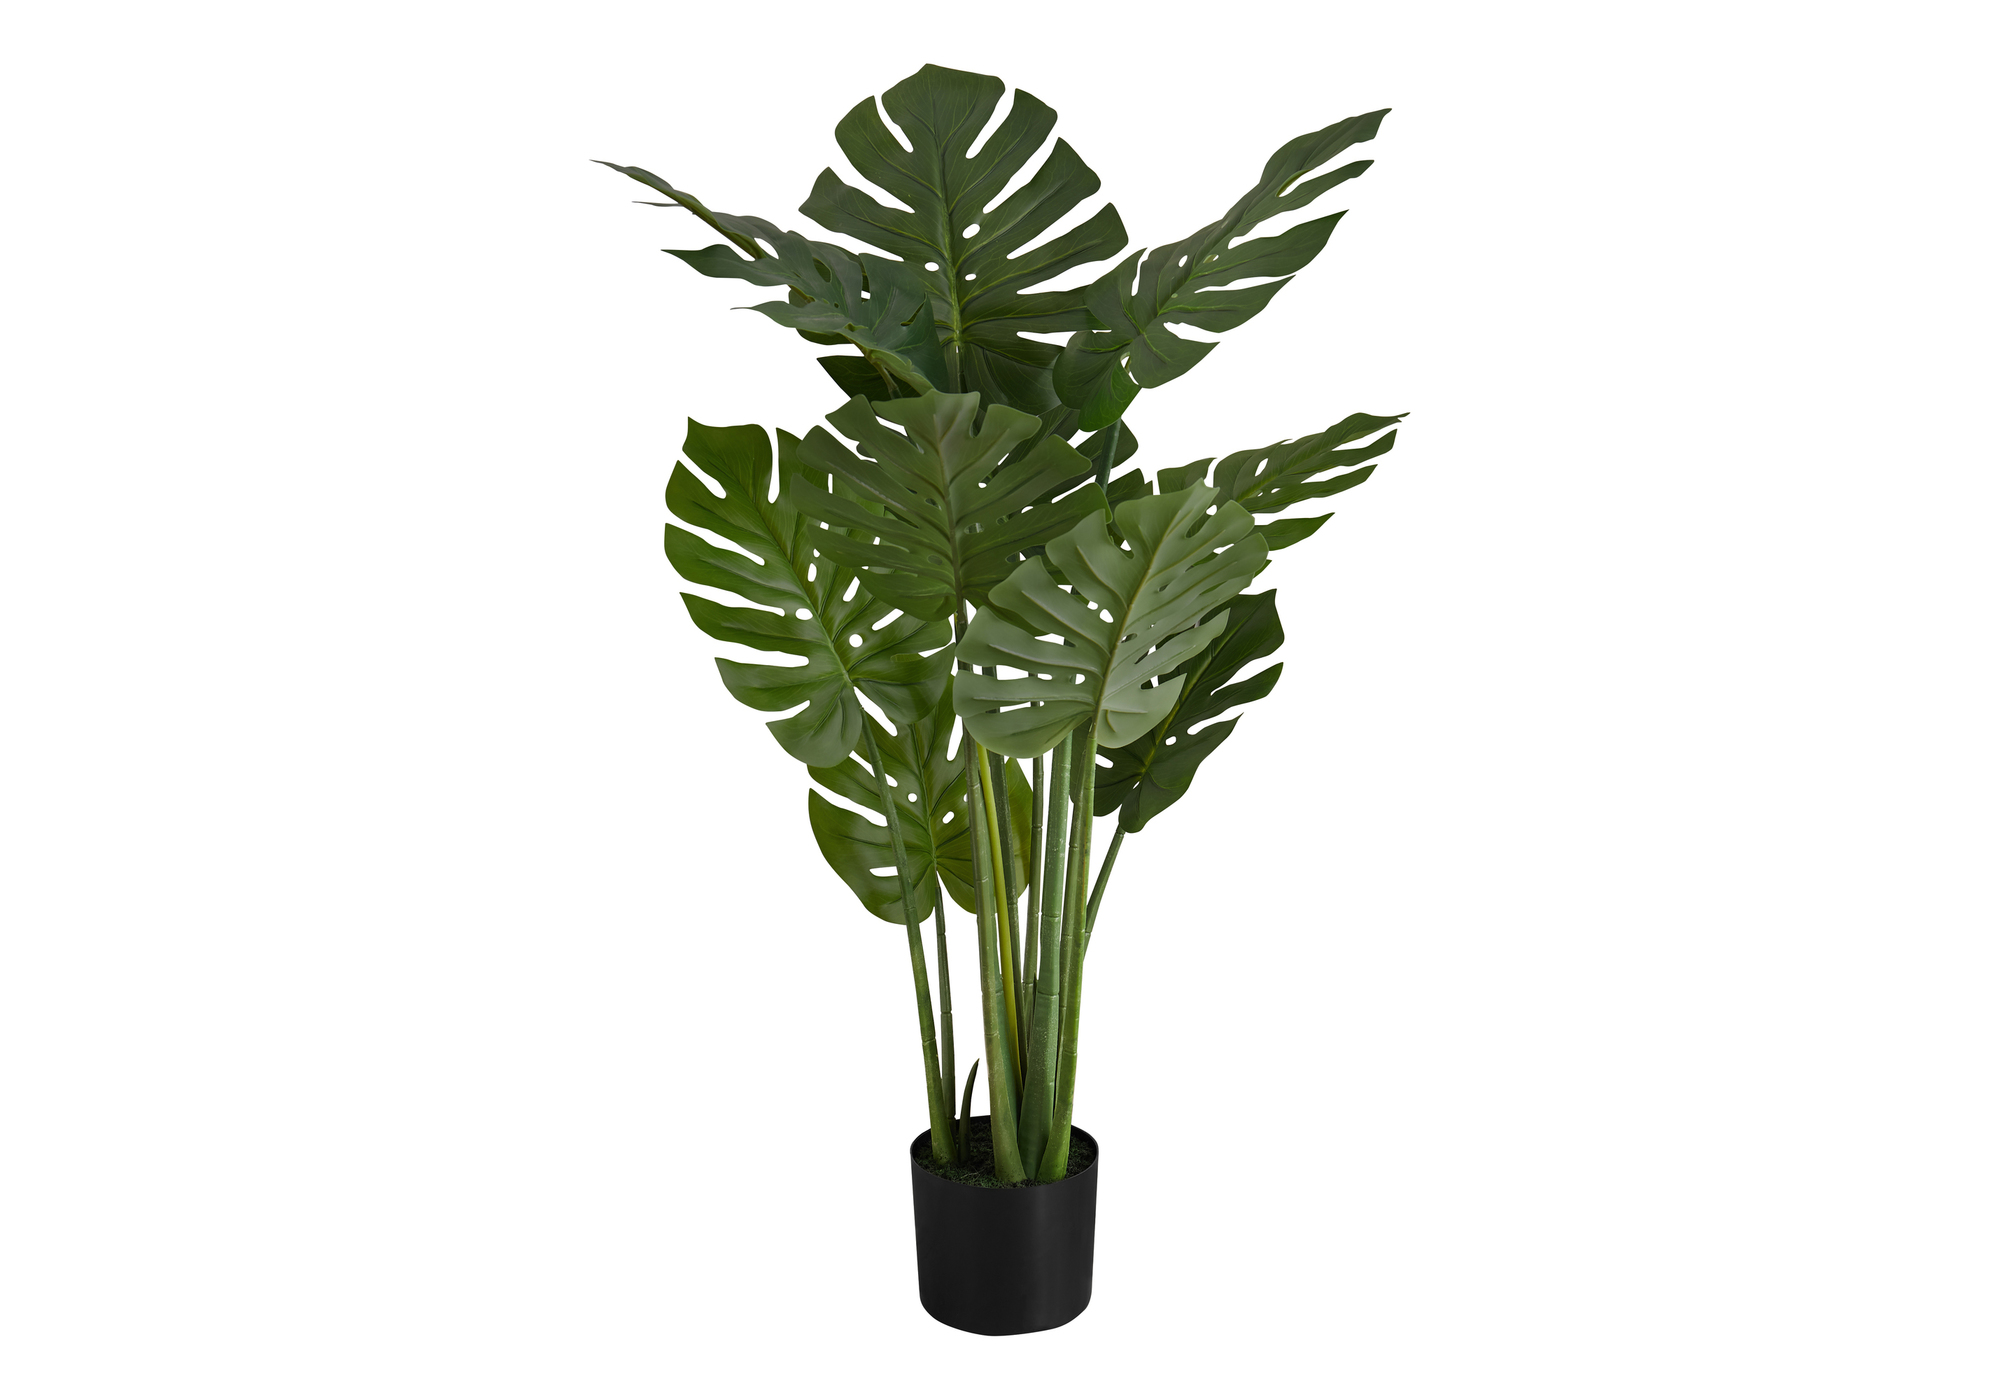 ARTIFICIAL PLANT - 45"H / INDOOR MONSTERA IN A 6" POT